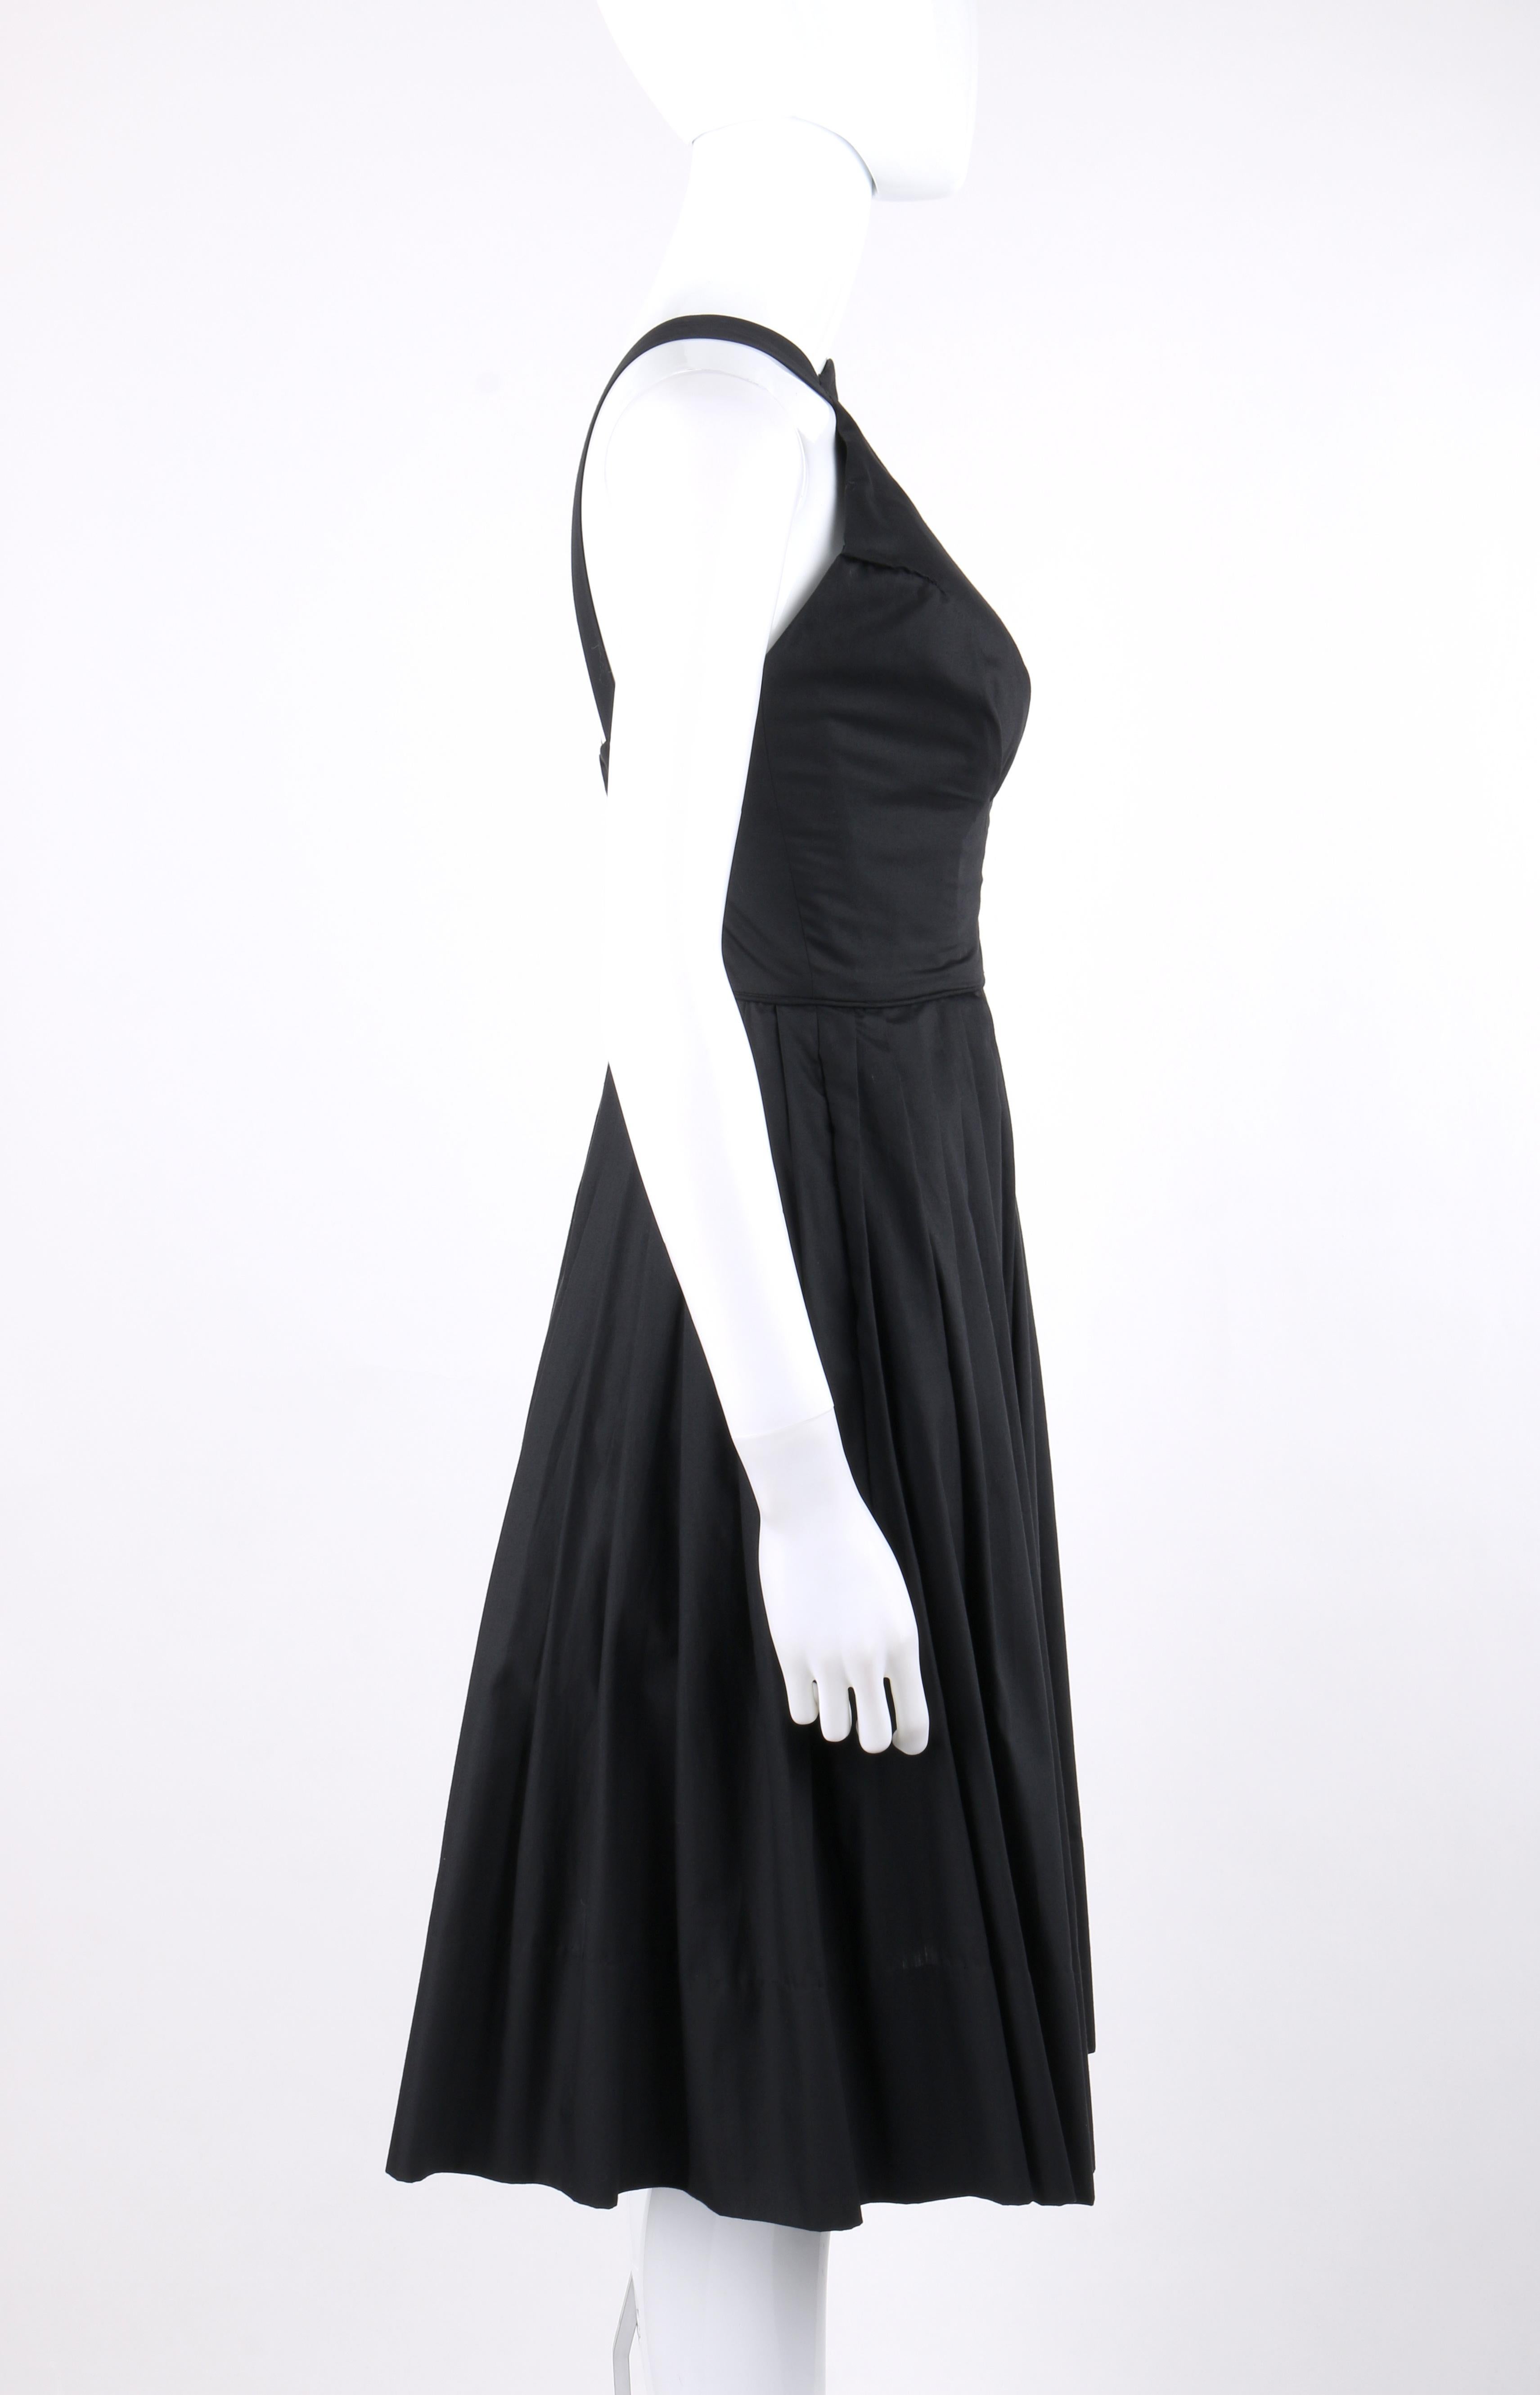 GRETA PLATTRY c.1950’s Midnight Black Pleated Sleeveless Fit N Flare Day Dress

Circa: 1950’s
Label(s): Greta Plattry Original
Designer: Greta Plattry
Style: Fit and flare circle skirt dress
Color(s): Black
Lined: Yes
Unmarked Fabric Content (feel